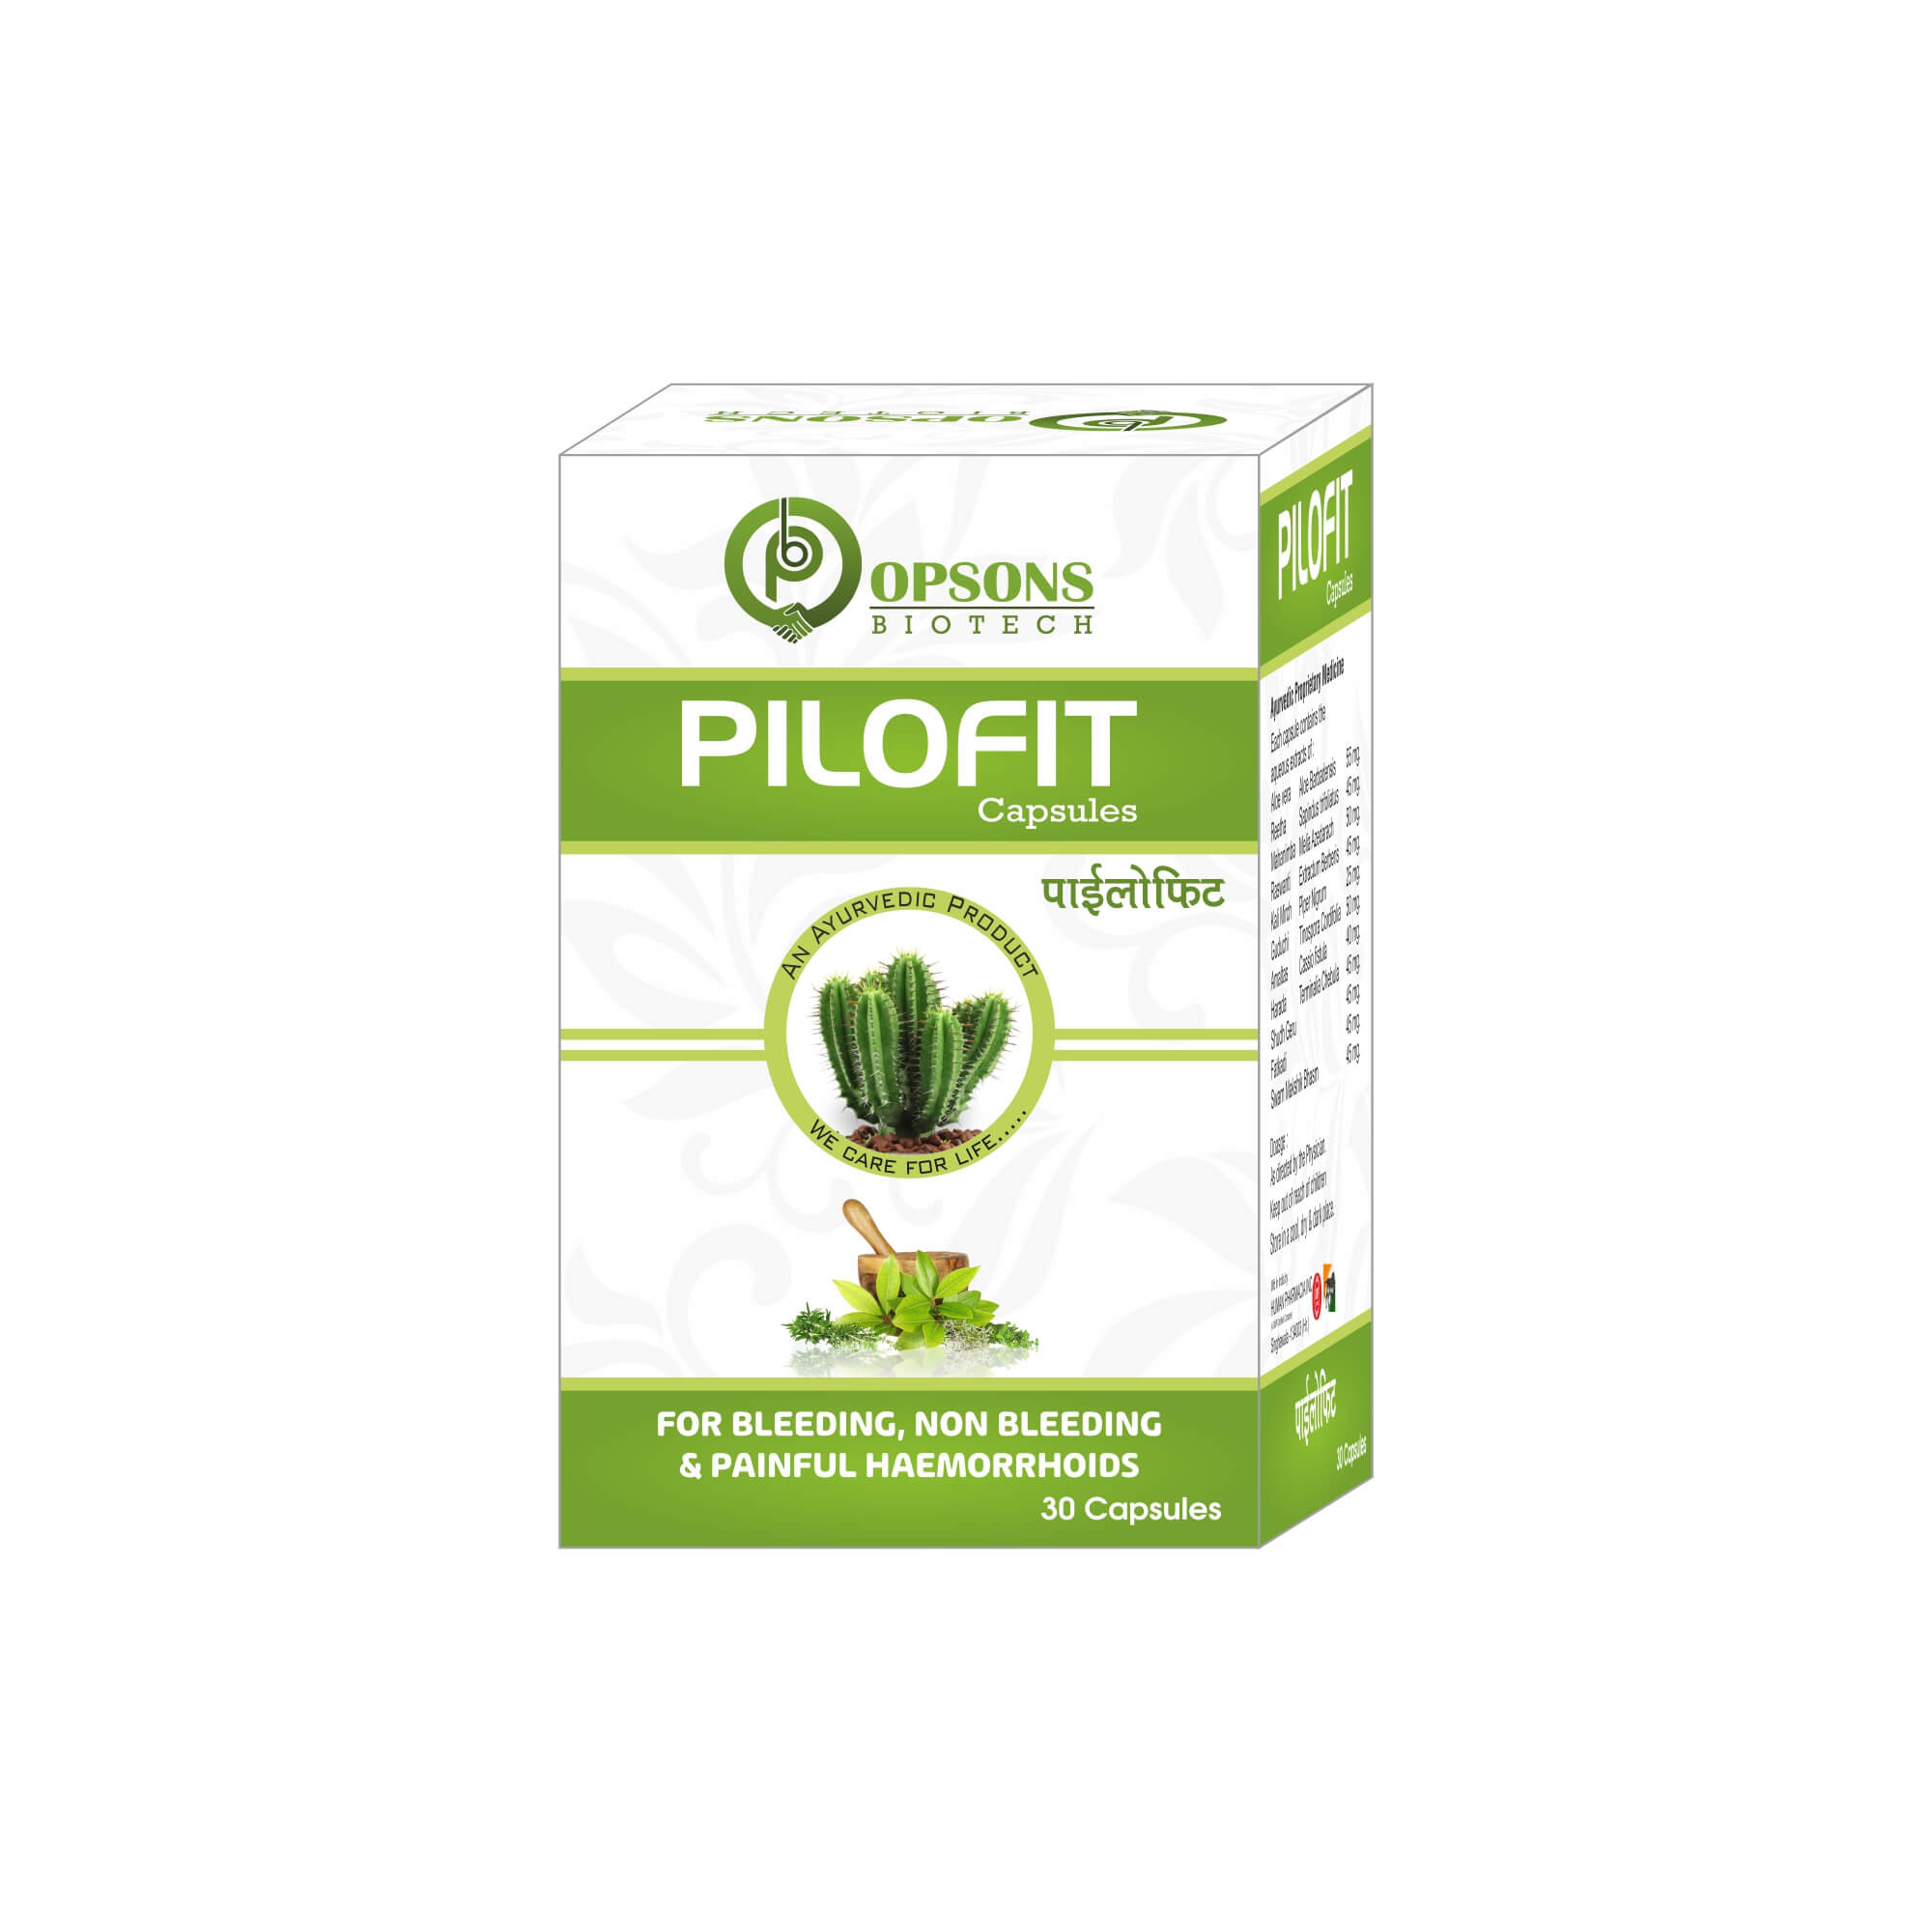 Product Name: Pilofit, Compositions of Pilofit are For Bleeding, Non Bleeding & Painful,Haemorrphonis - Opsons Biotech